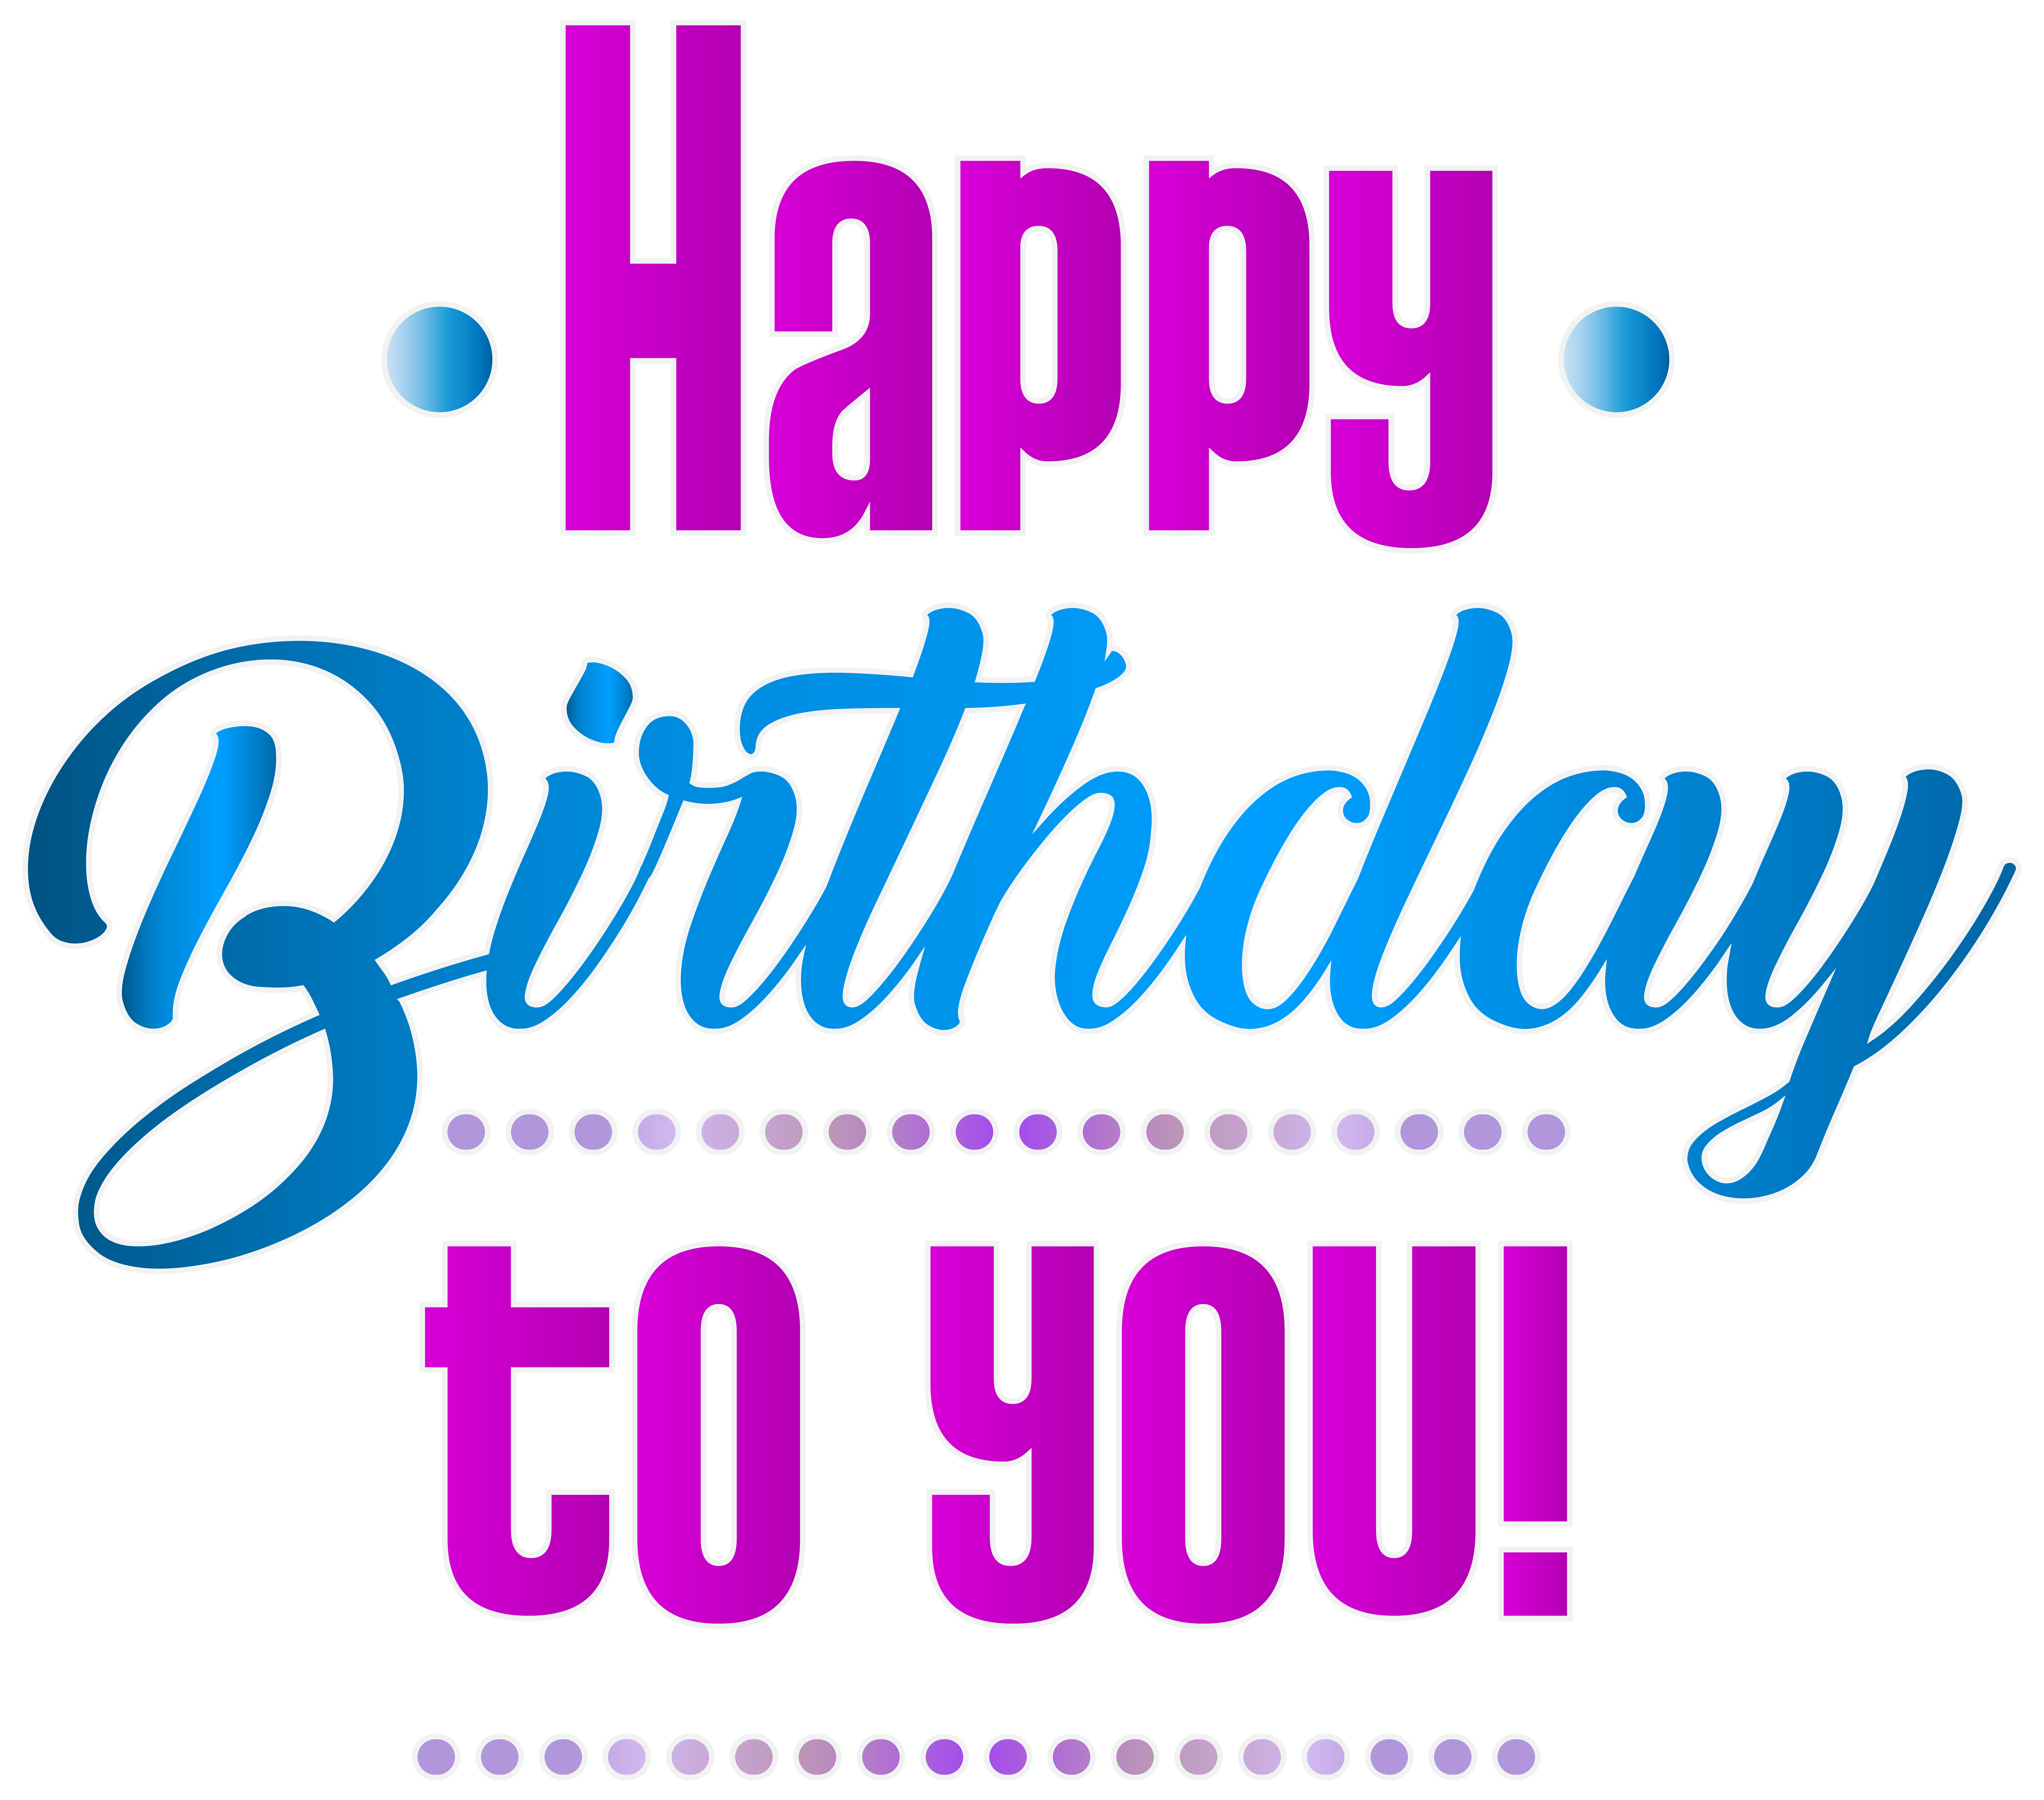 Png image gallery yopriceville. Invitation clipart happy birthday